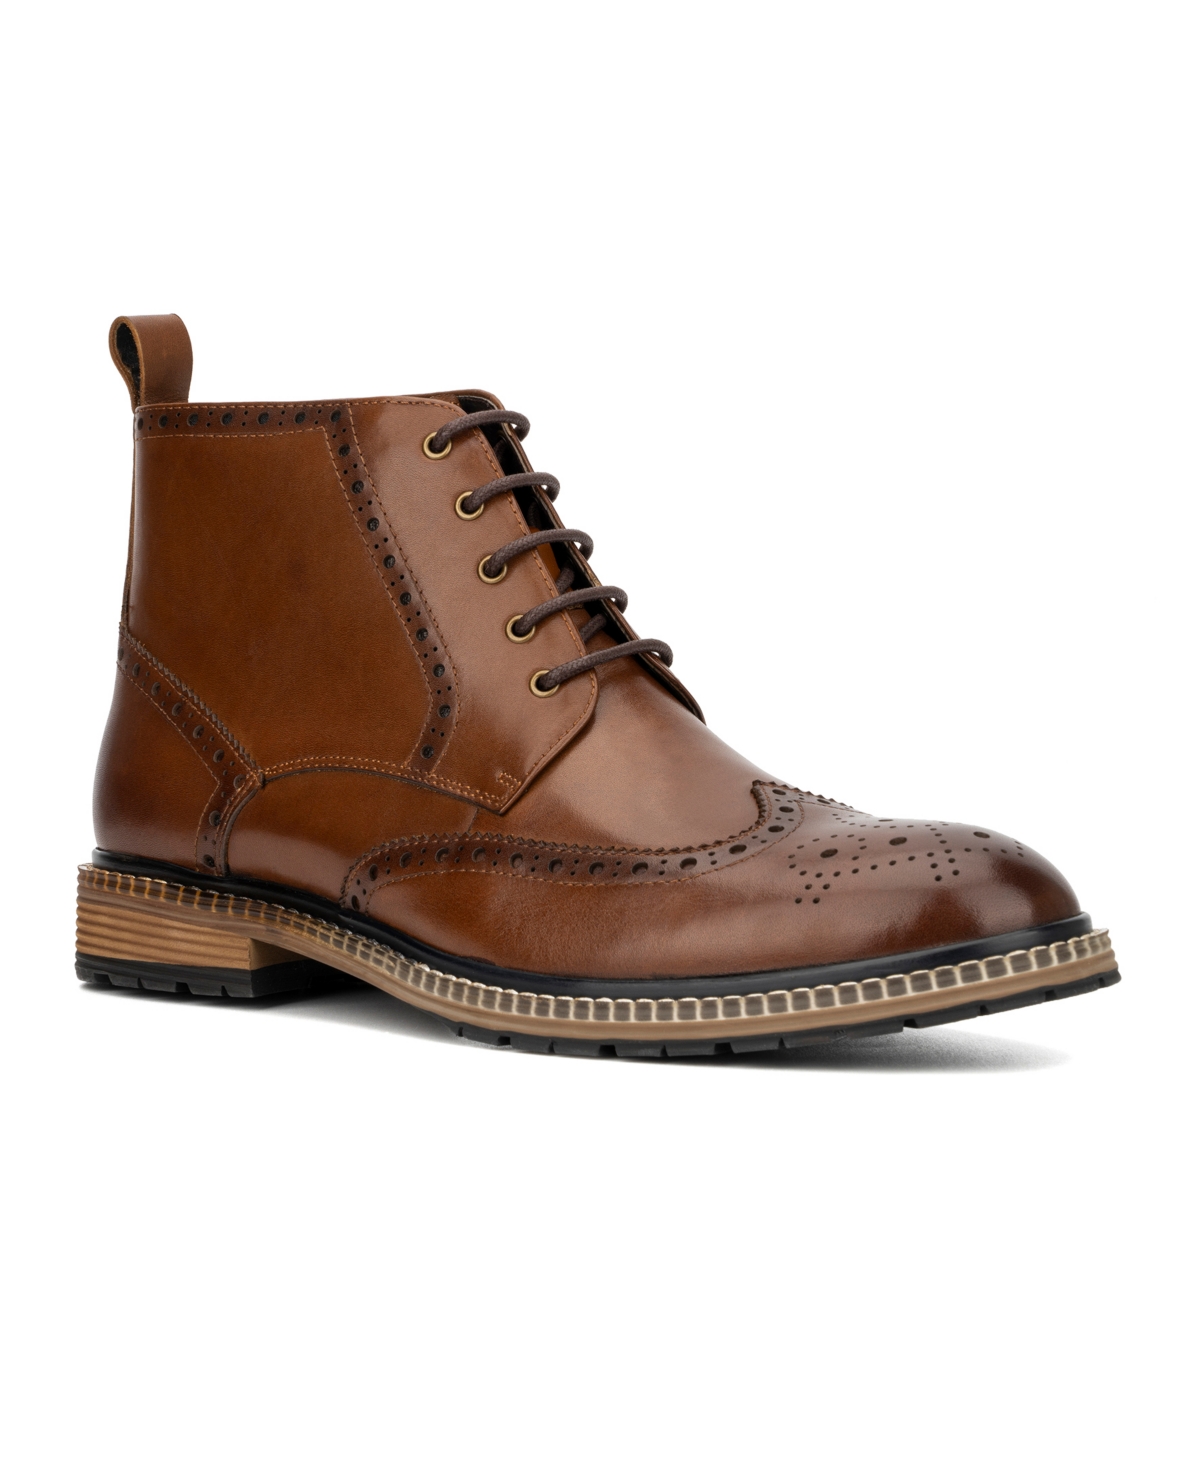 Vintage Foundry Co Titus Boot In Tan